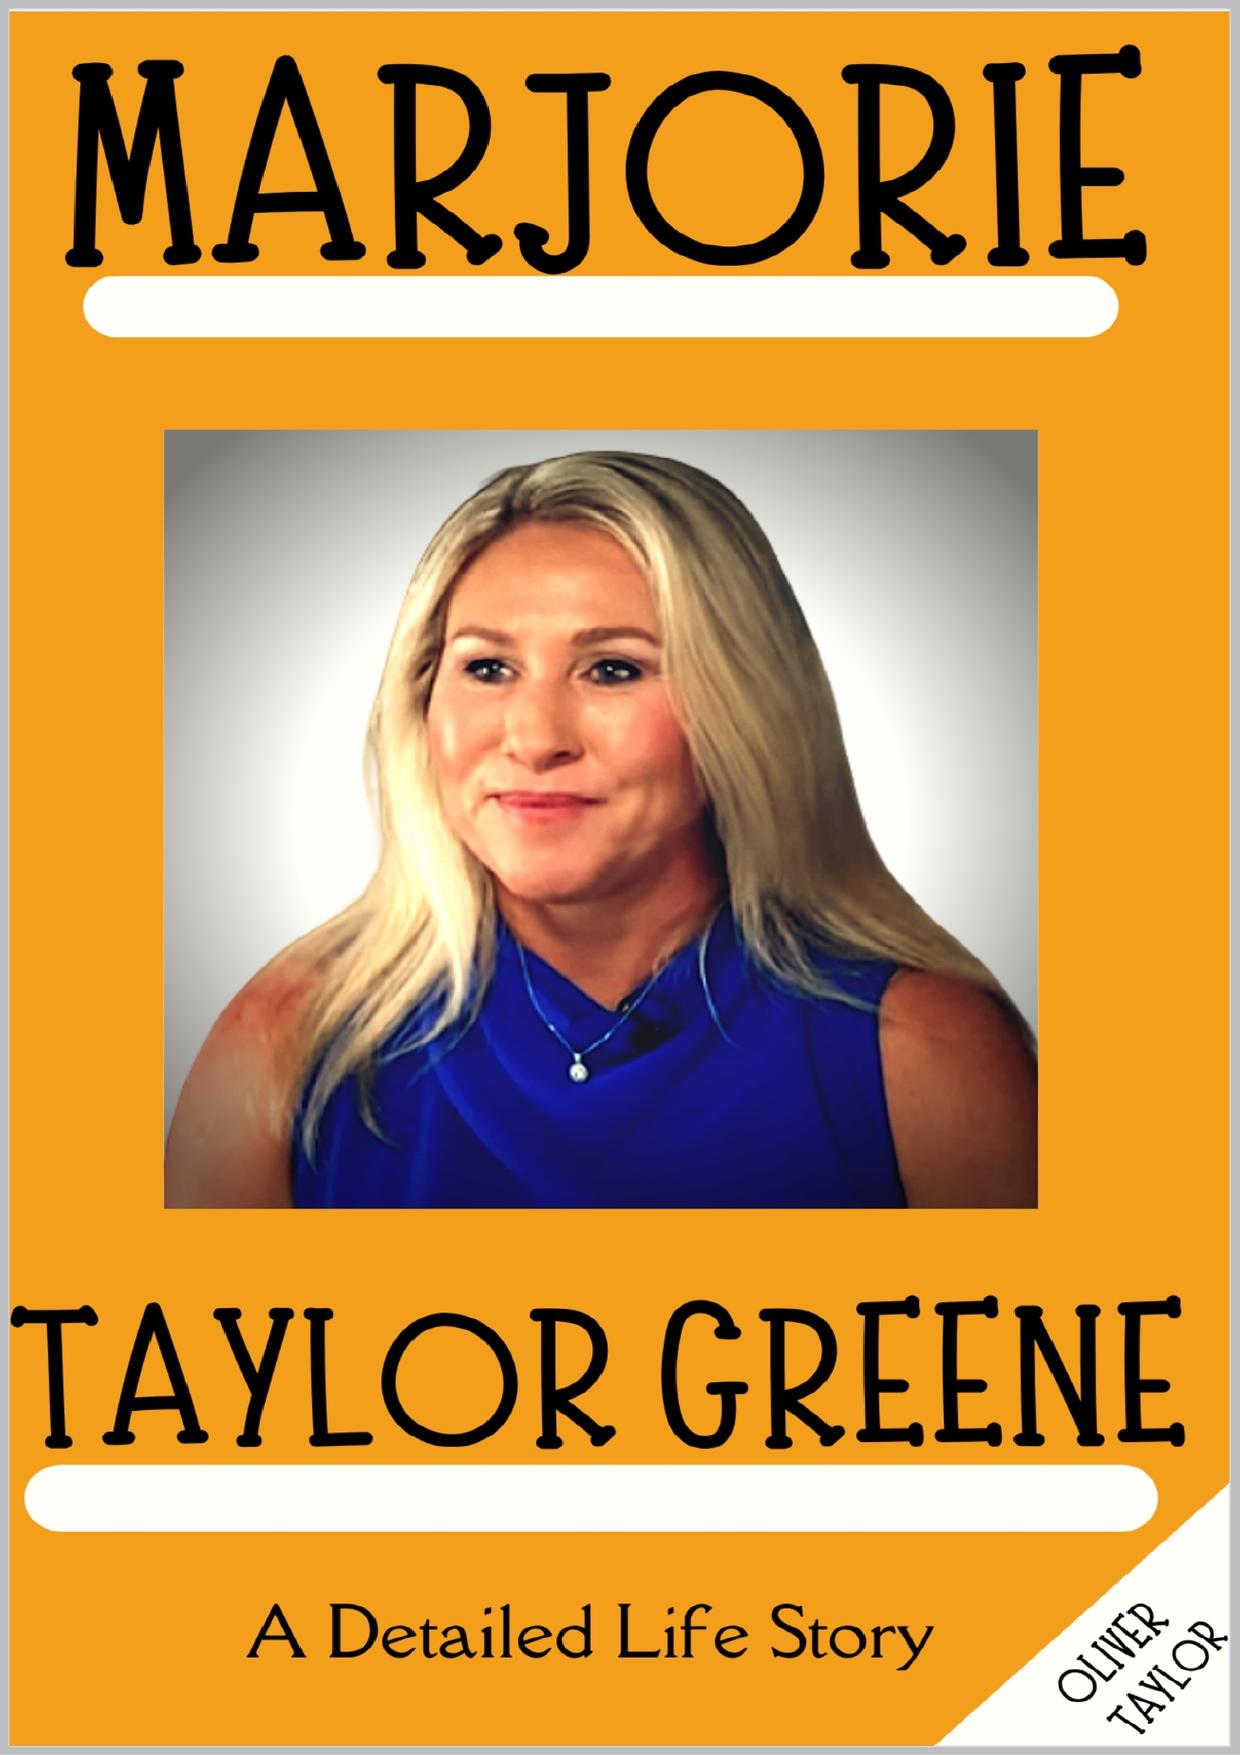 Marjorie Taylor Greene: A Detailed Life Story